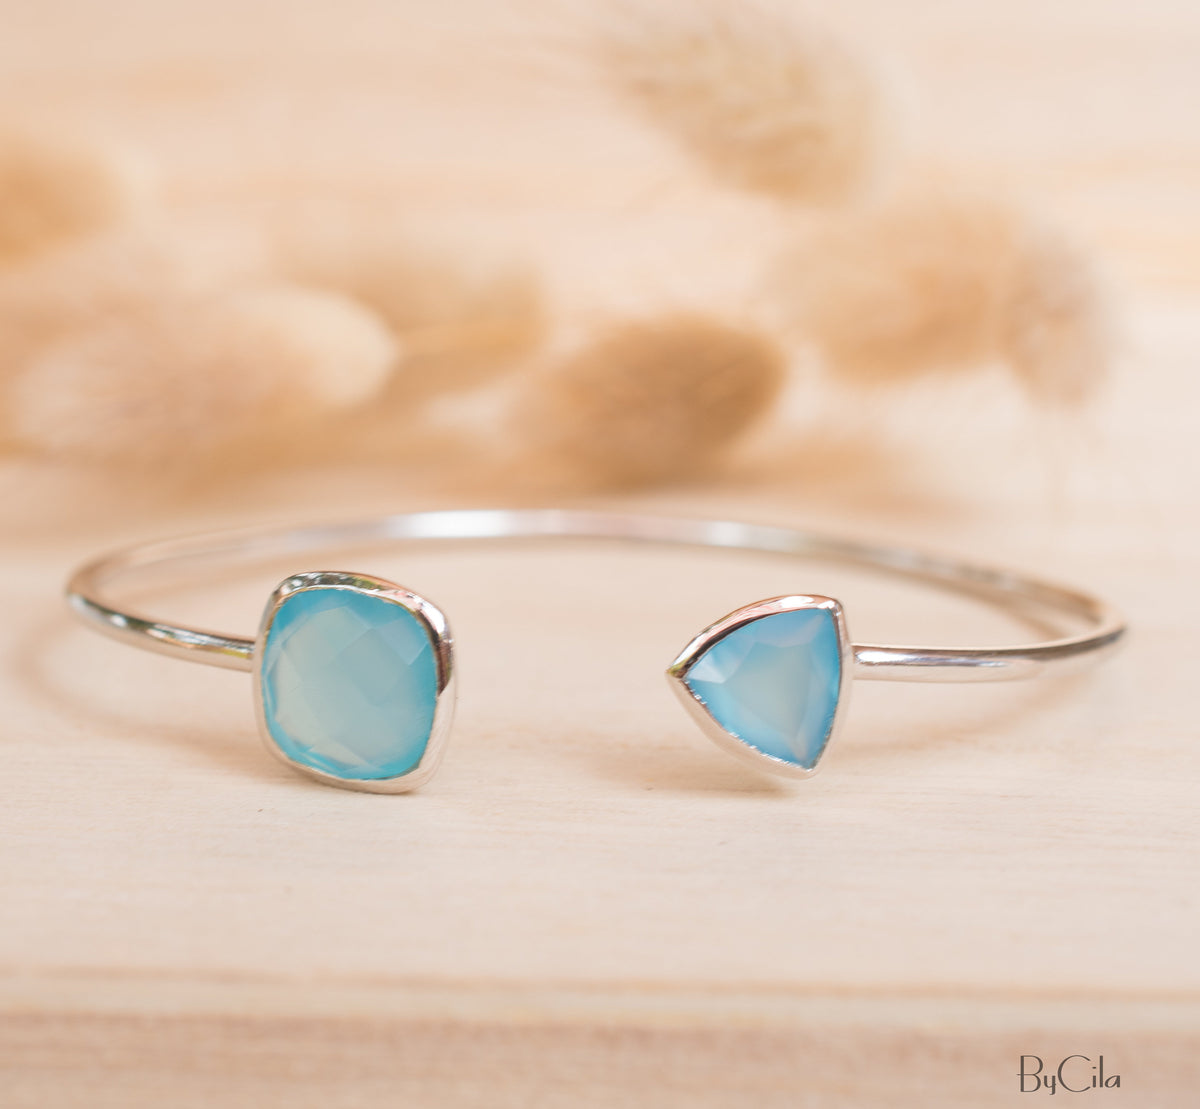 Blue Chalcedony Bangle Bracelet *Gold Plated 18k or Silver Plated* Gemstone * Gypsy * Adjustable * Statement * Stacking * Layering * BJB009A